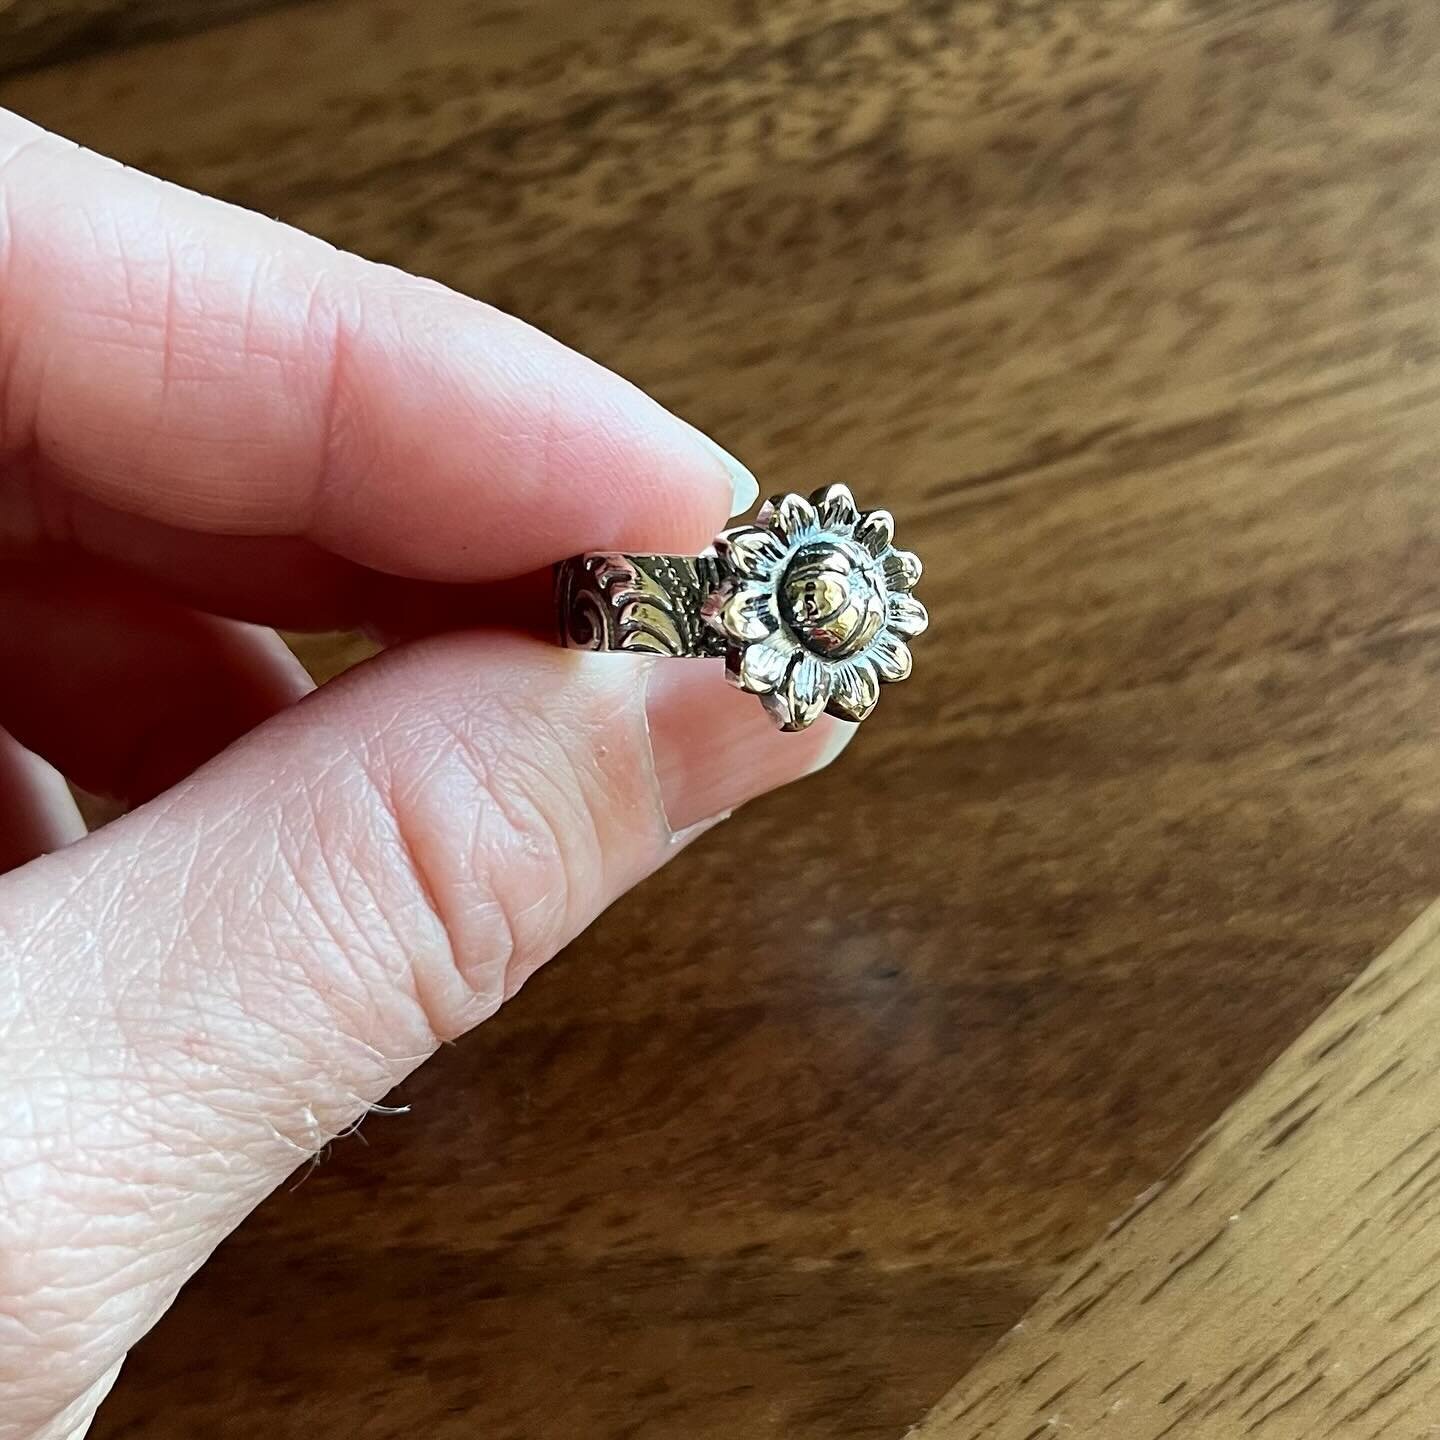 Happiness is thinking Spring in early March!

#mnjewelrybyjessica #sterlingsilverjewelry #sterlingsilverring #recycledsterlingsilver #handmadejewelry #flowerring